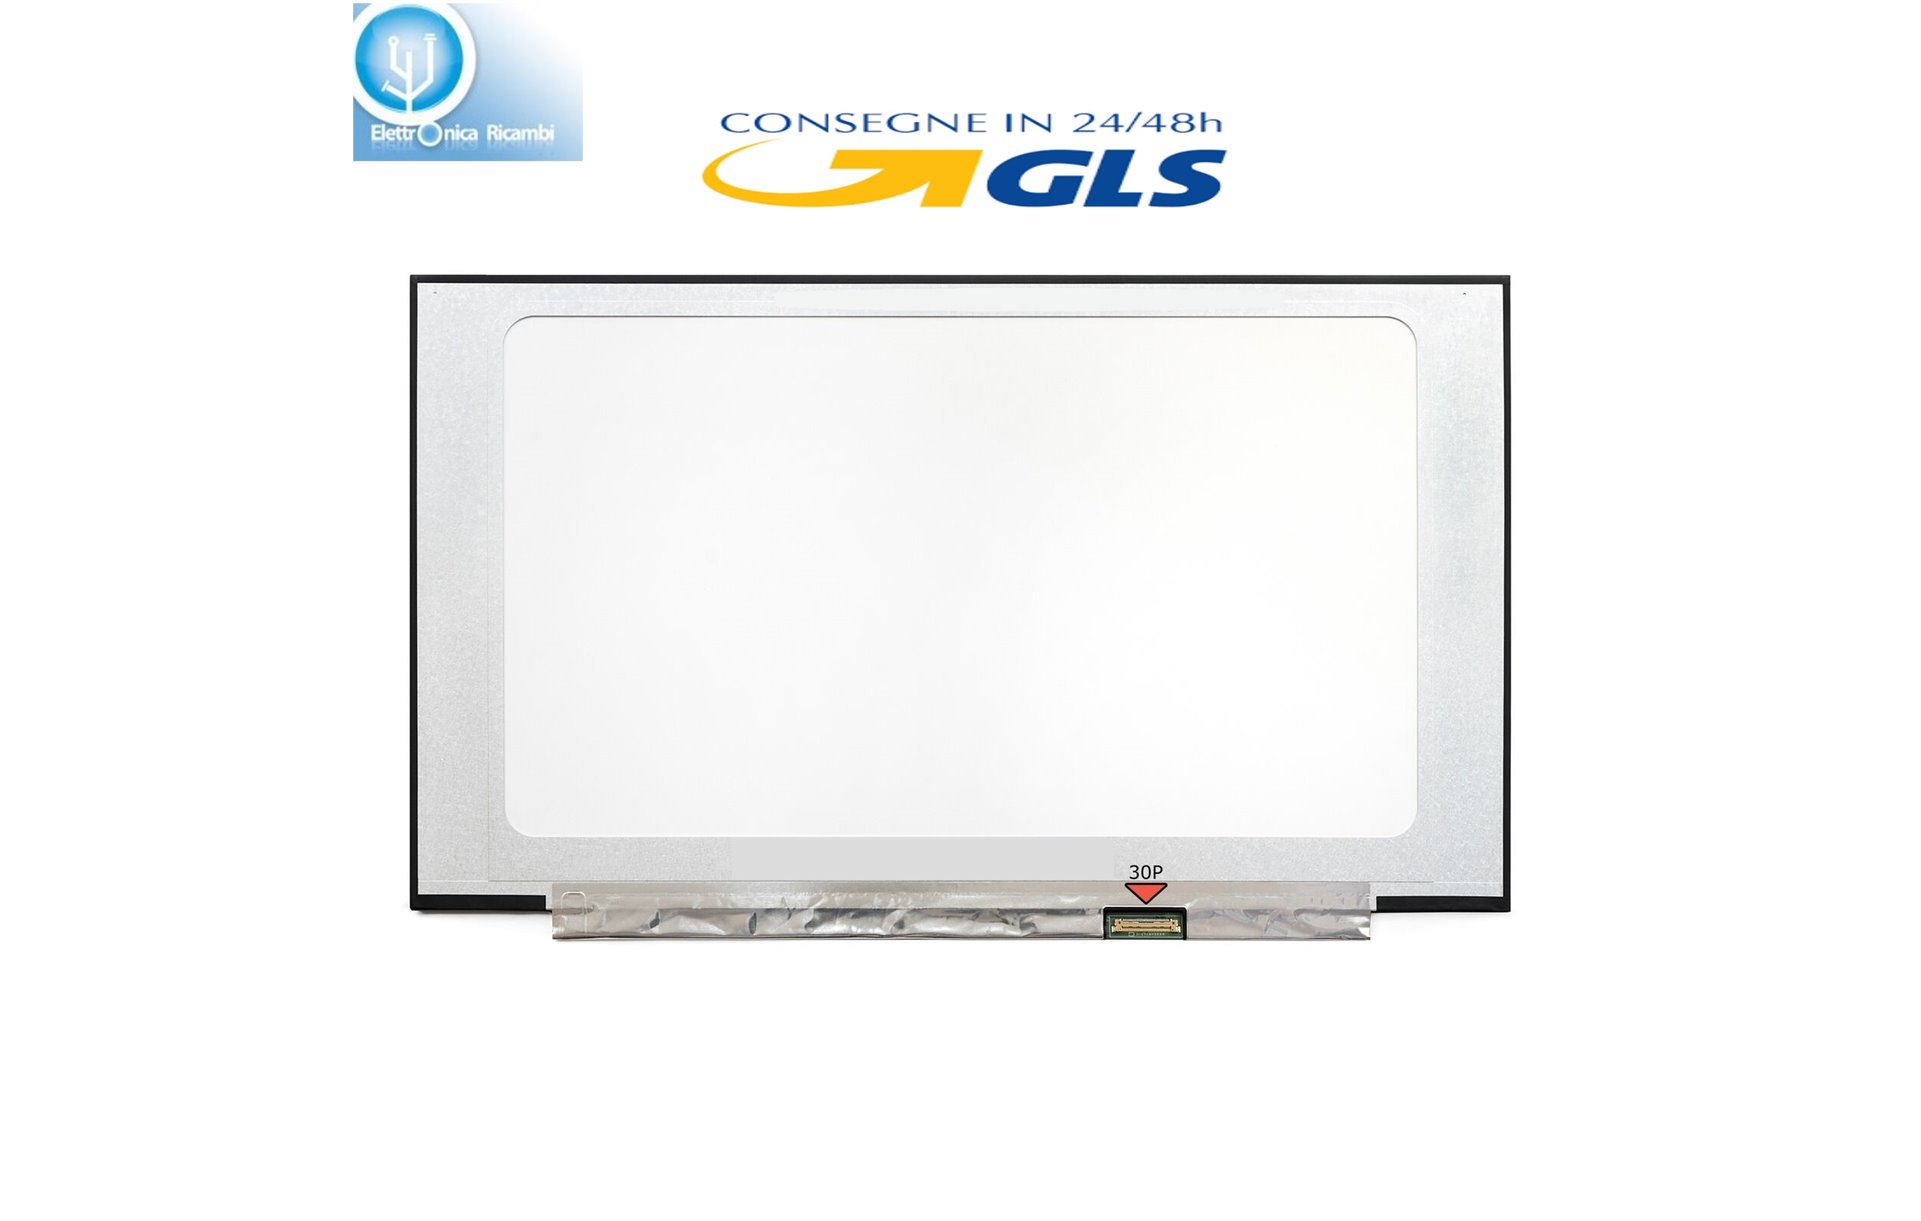 DISPLAY LCD Schermo Dell INSPIRON 15 5585 15,6" (13.6"x7.6") LED 30 pin  IPS